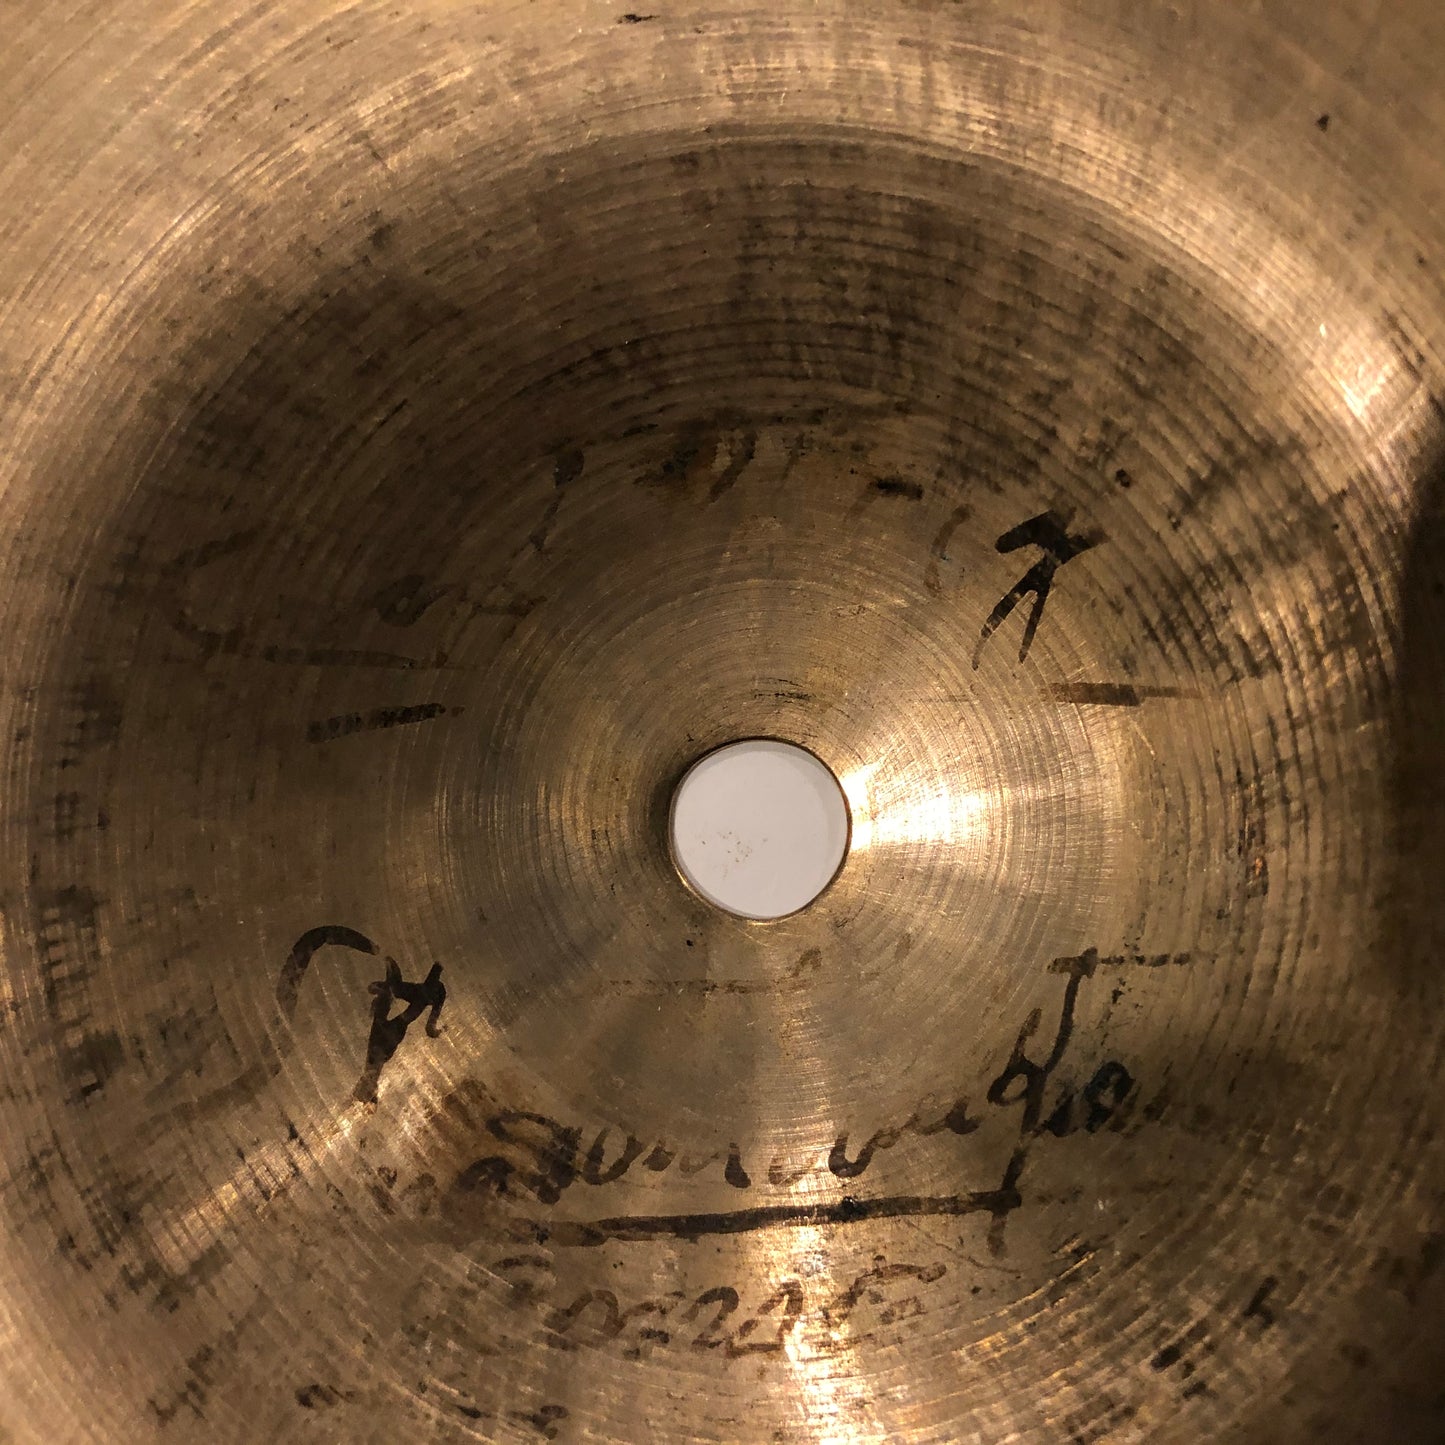 14" Zeltian 1930s/40s Small Ride Cymbal 1246g #202